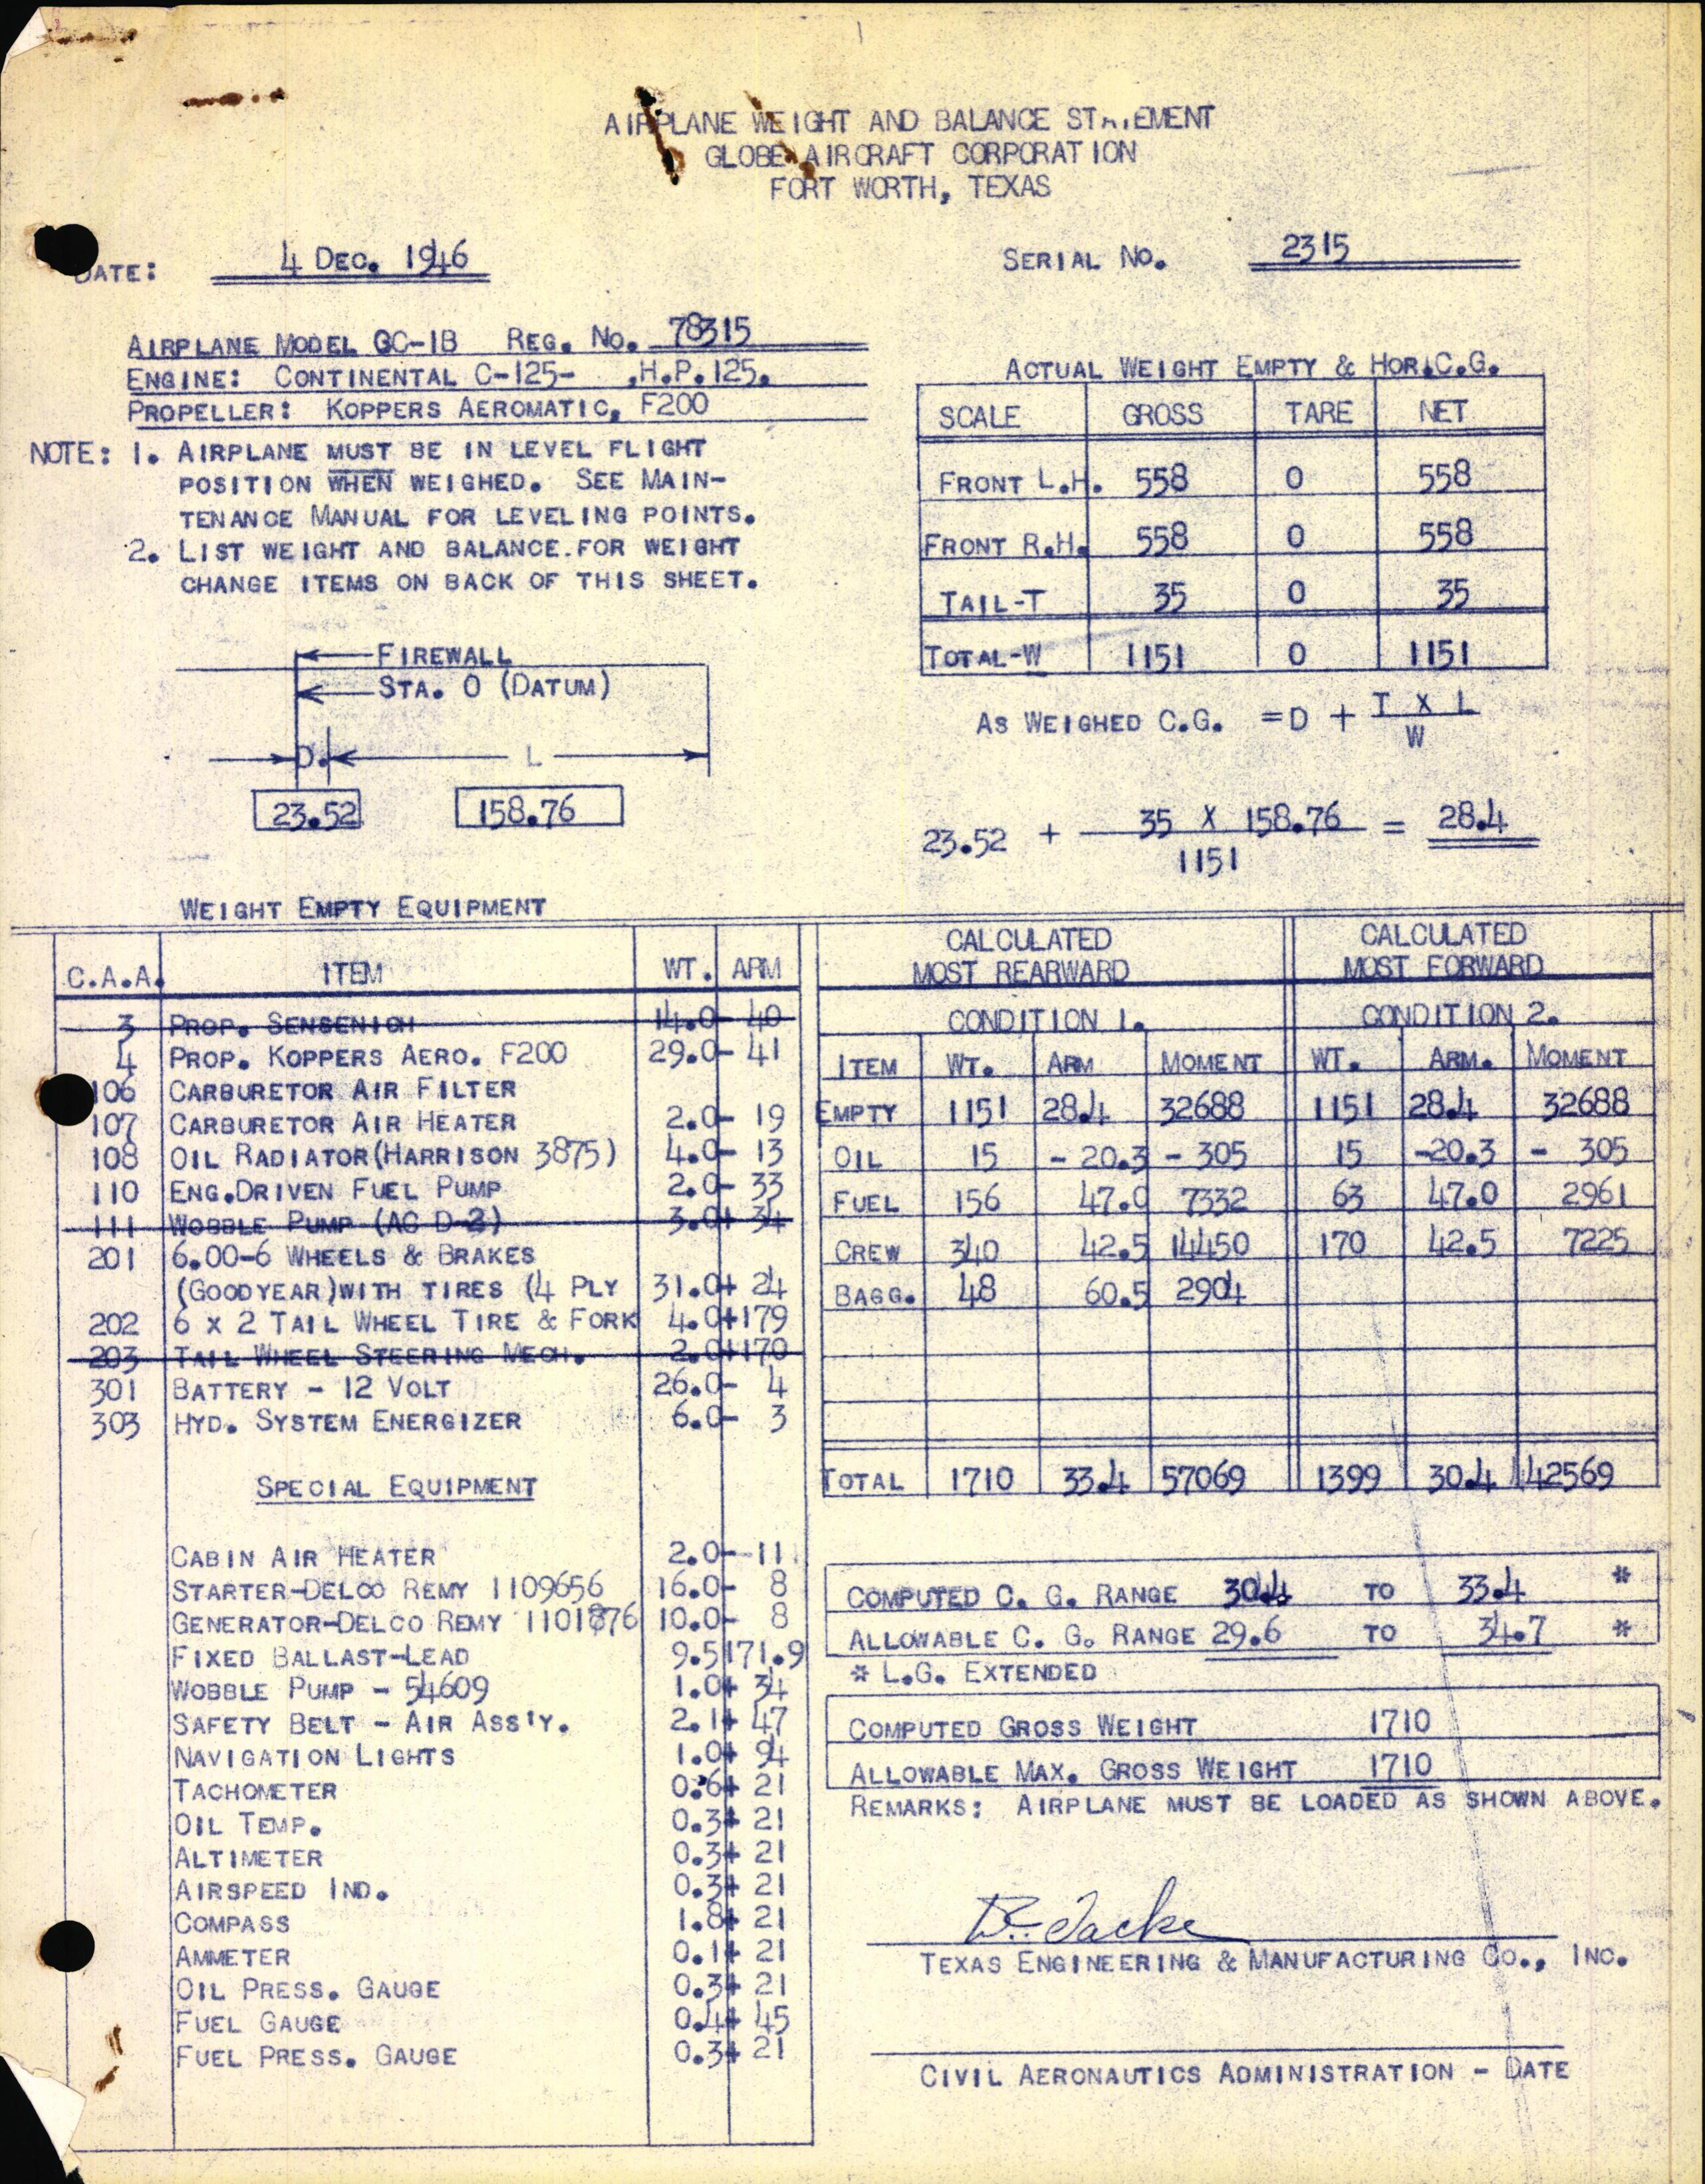 Sample page 1 from AirCorps Library document: Technical Information for Serial Number 2315